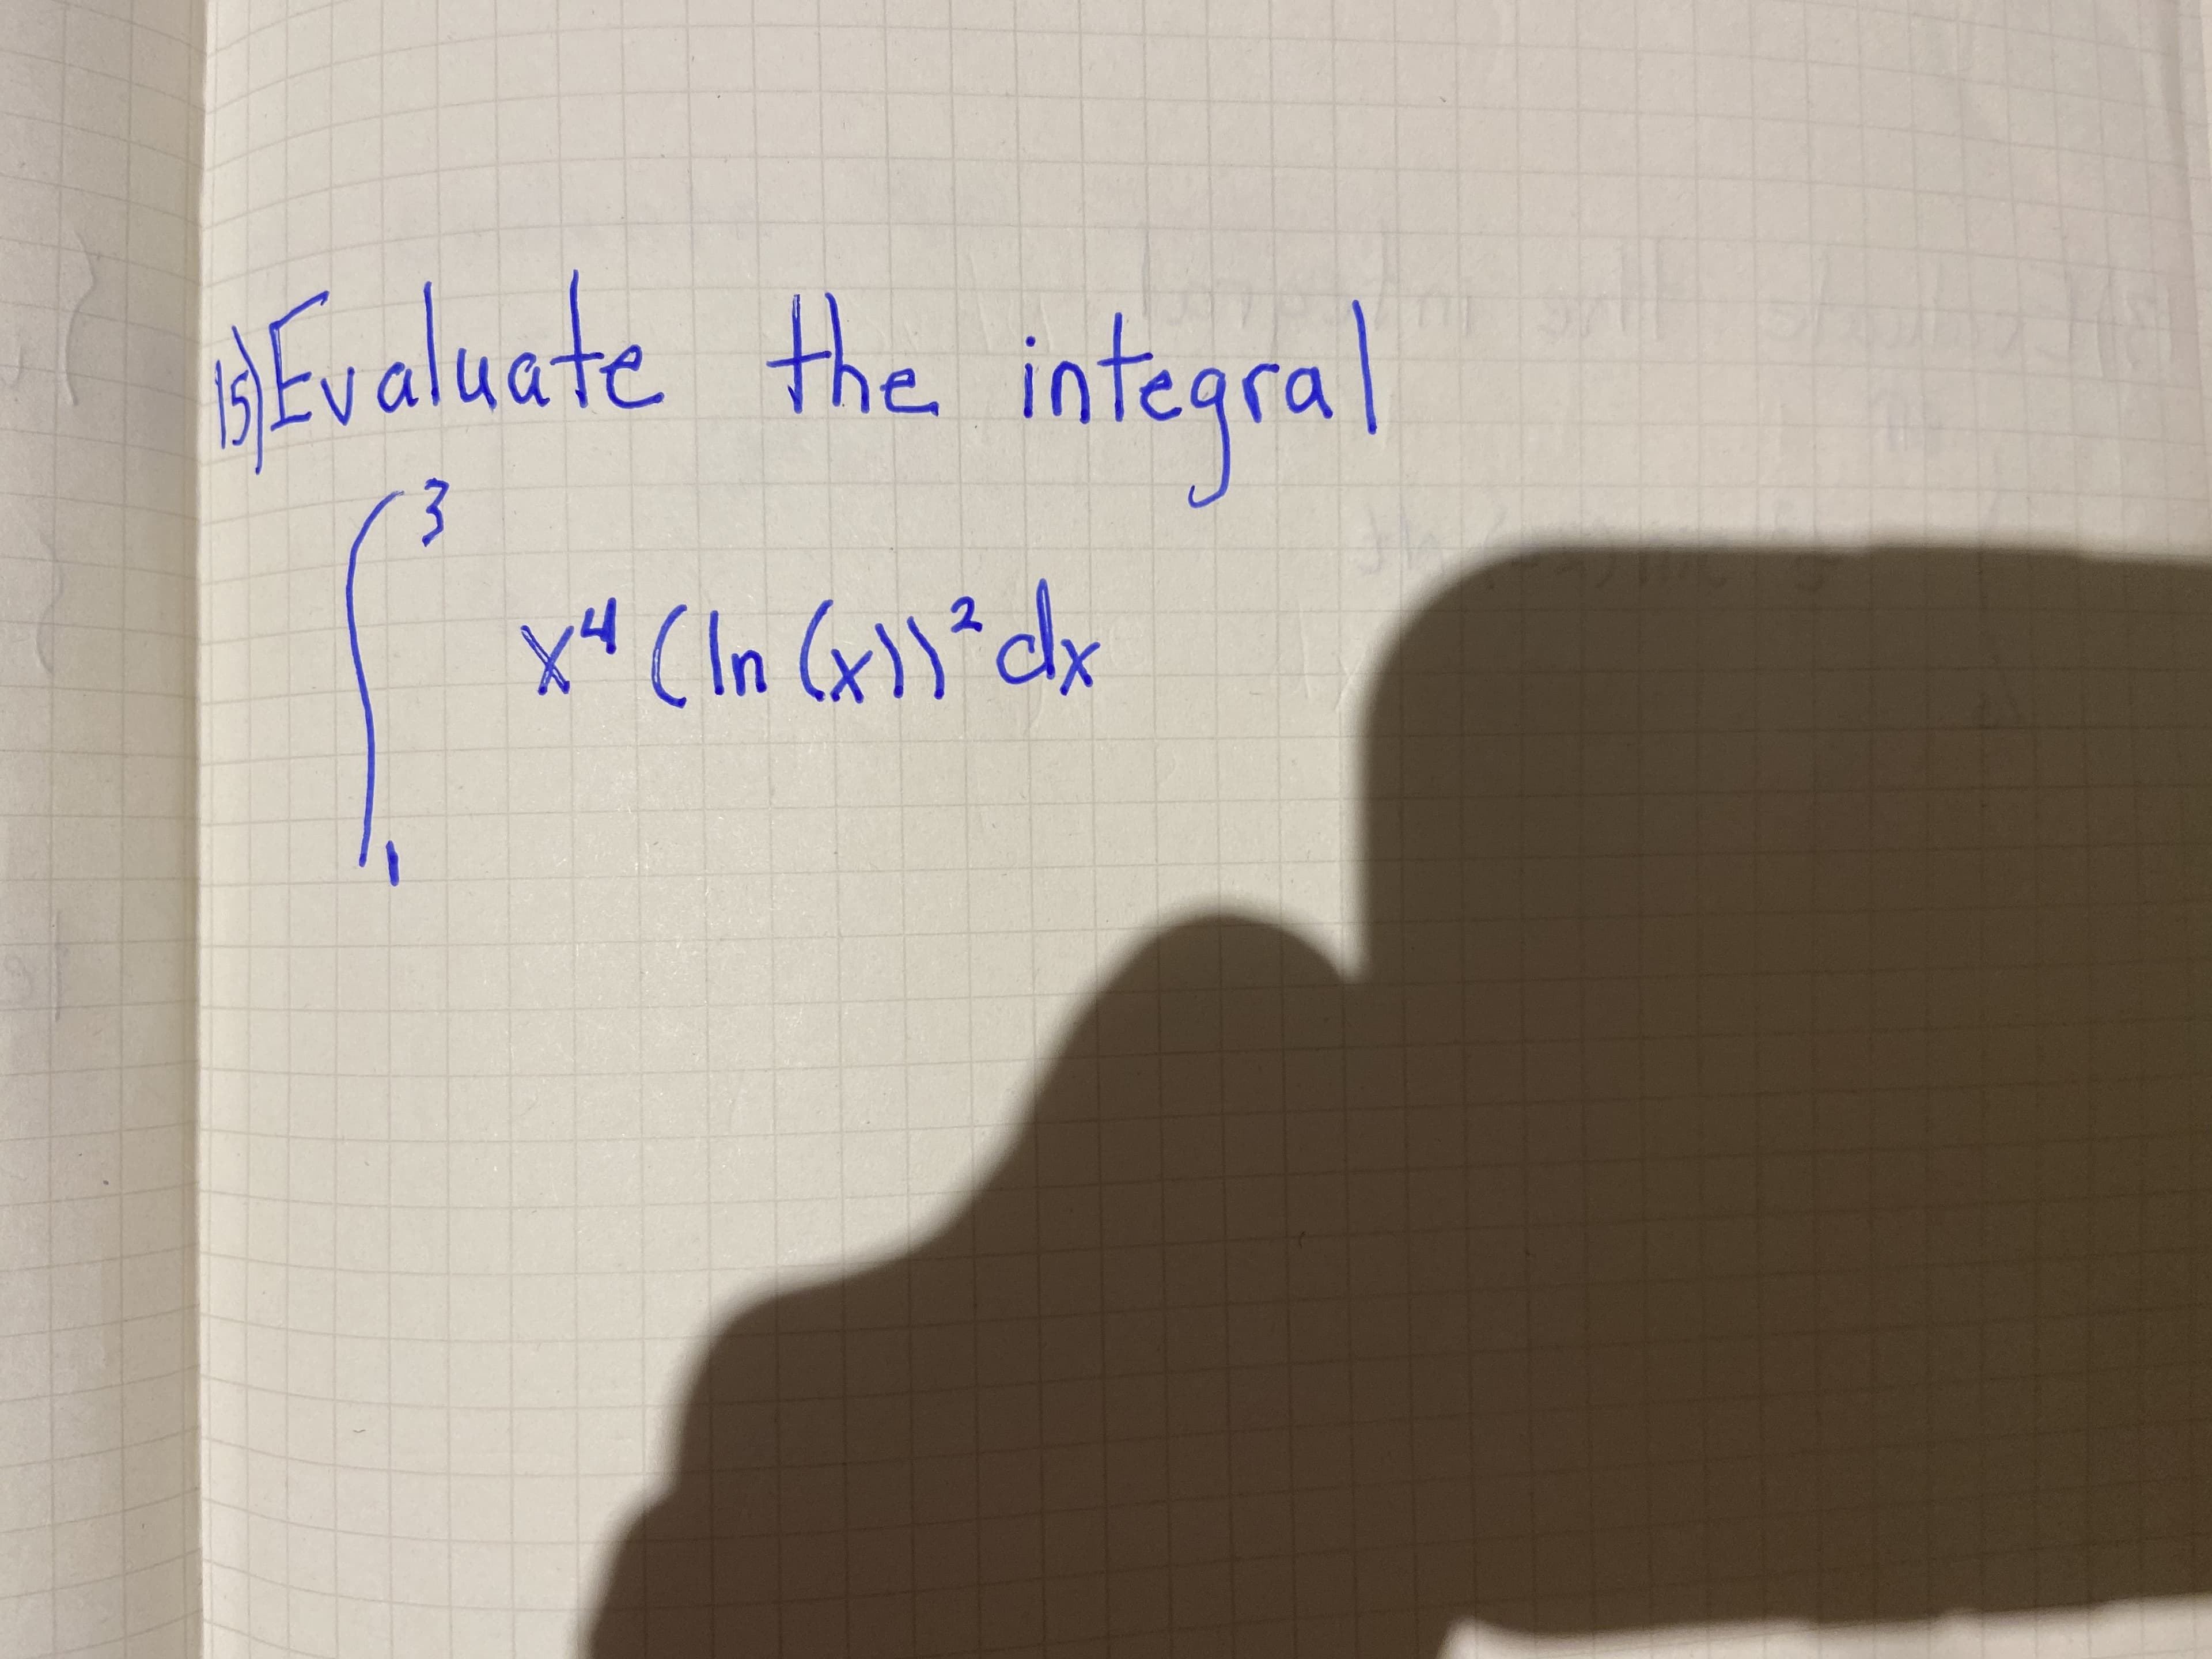 HEvaluate the integral
3
In
